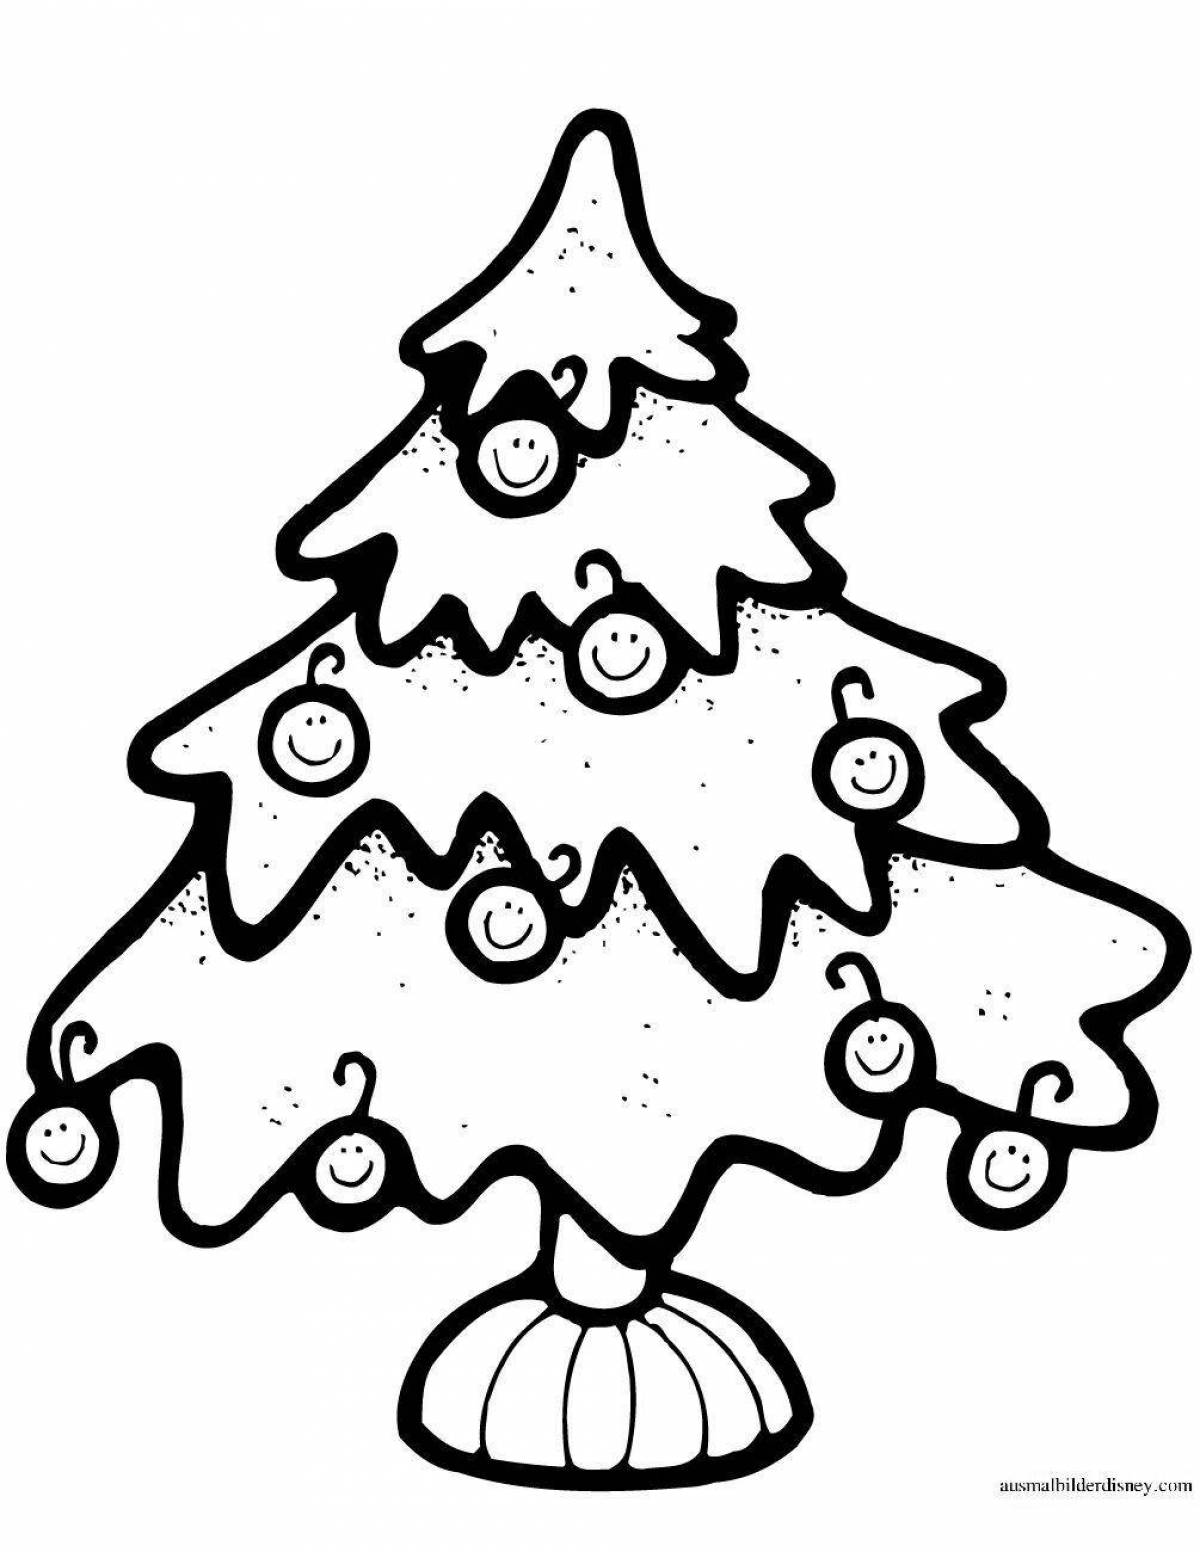 Funny coloring outline of the Christmas tree